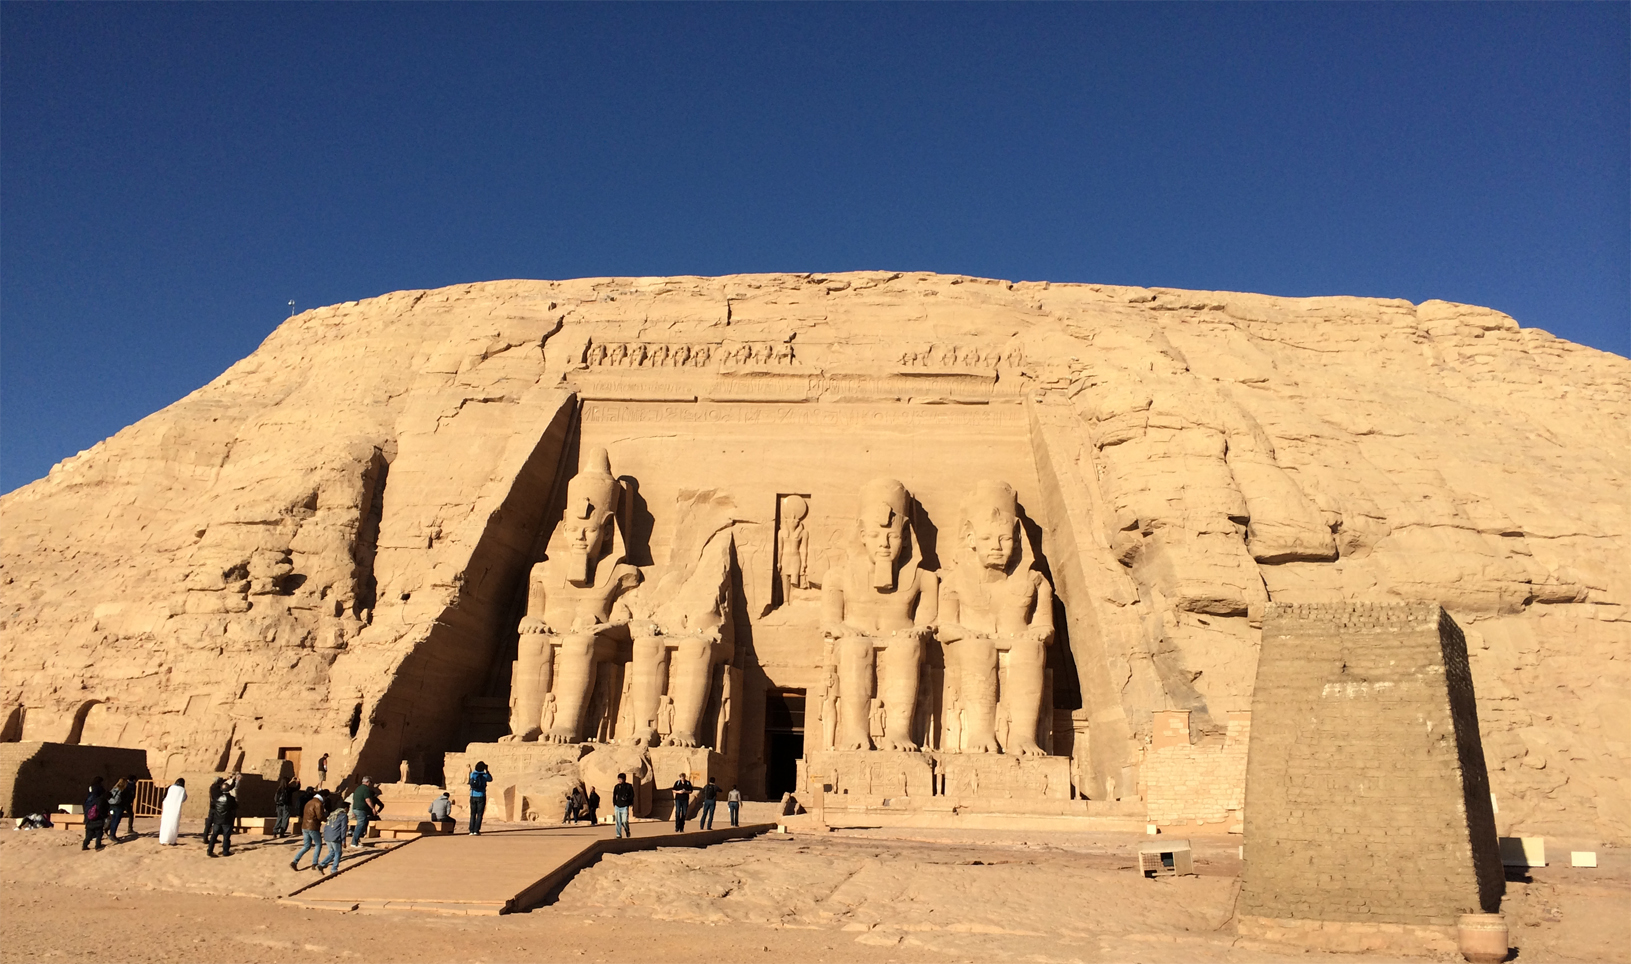 
Excursion to the temples of Abu Simbel 